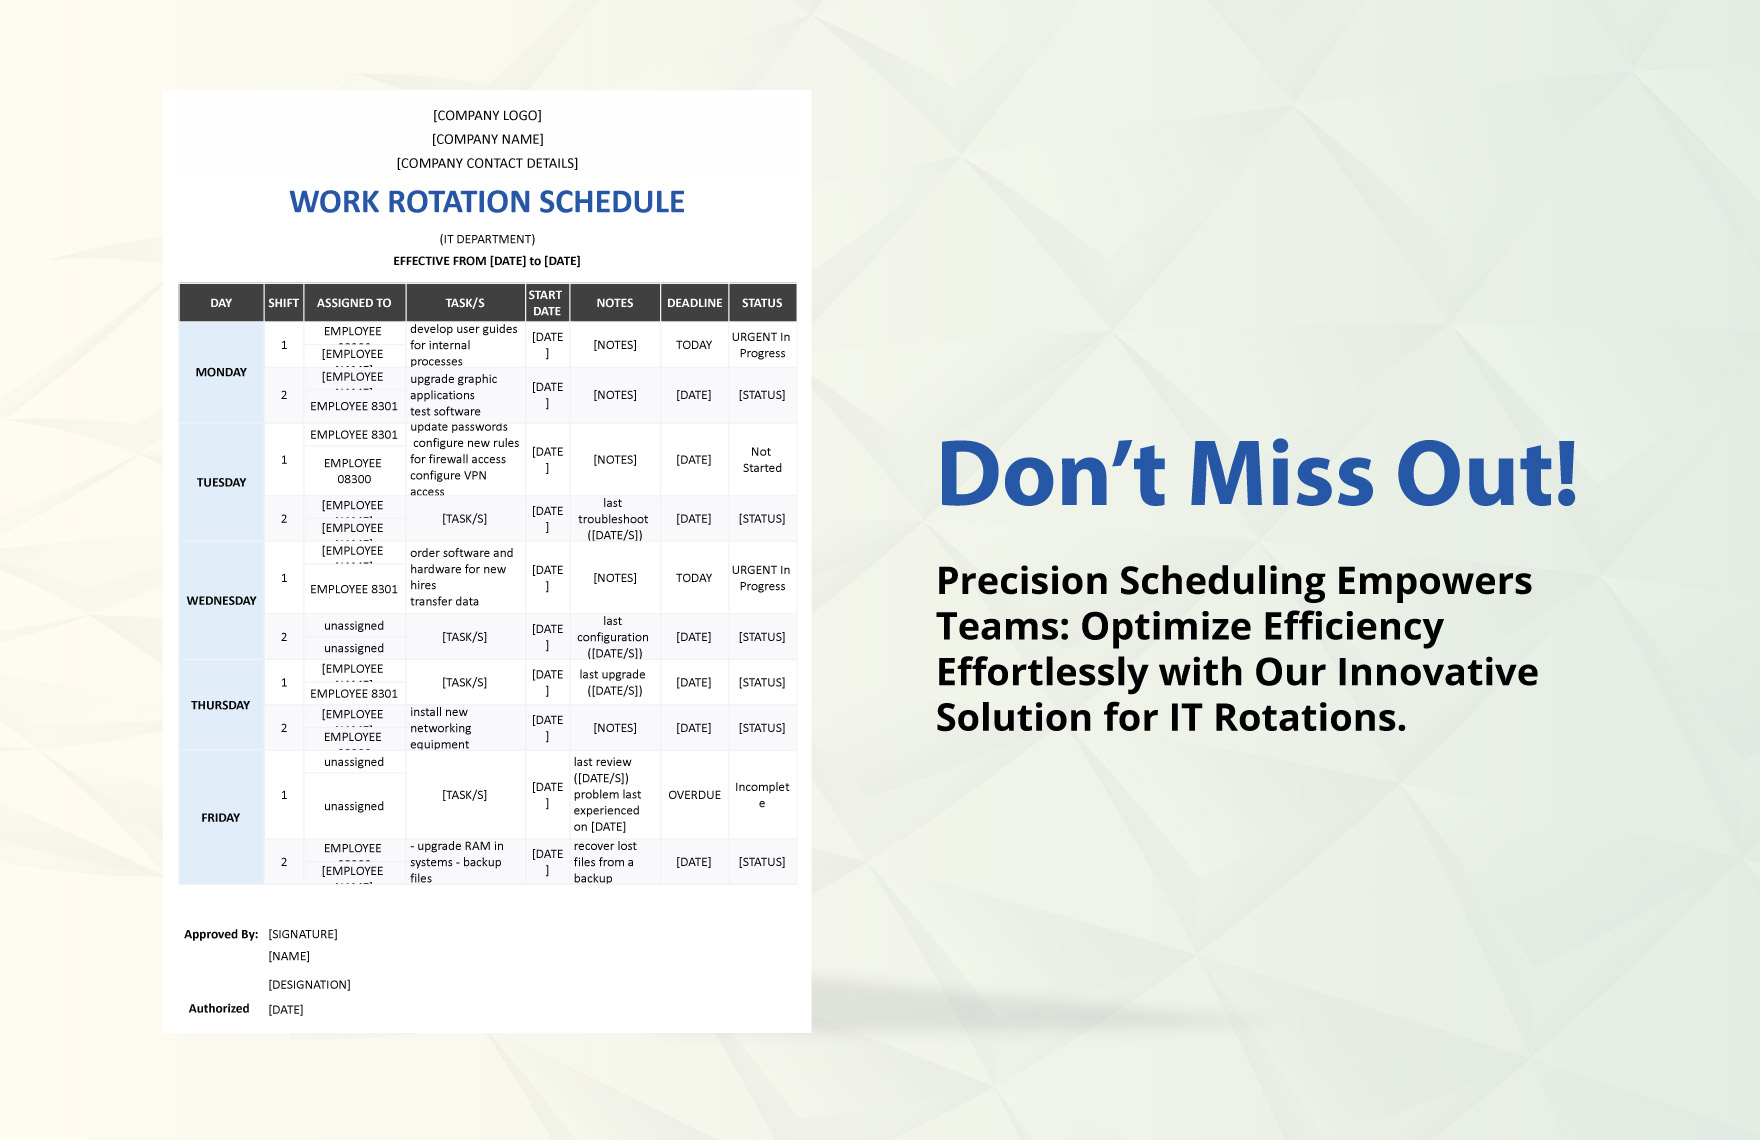 IT Work Rotation Schedule Template